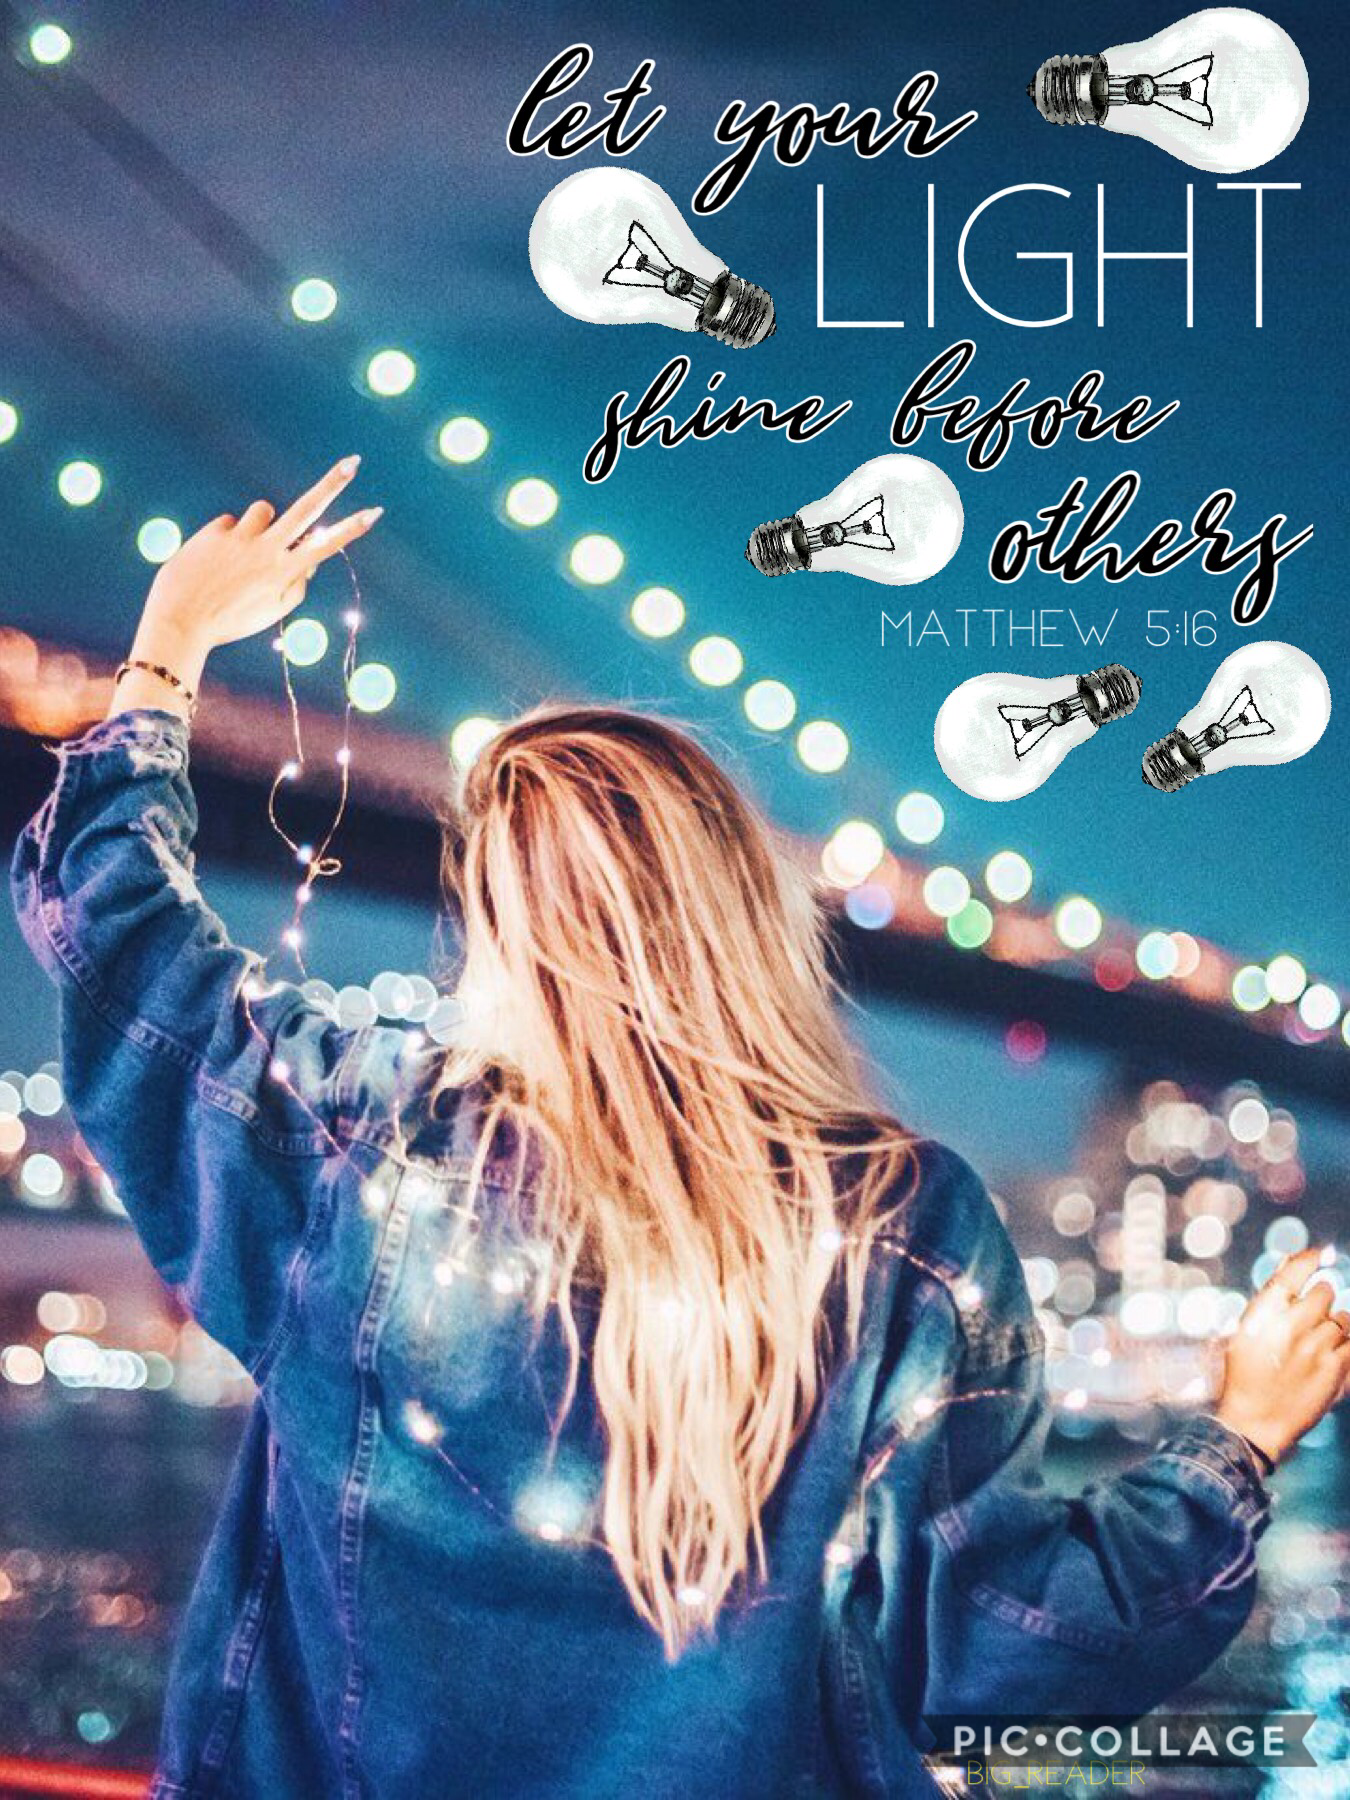 Hi y’all! It’s Big_Reader here! ✨
Hope y’all like this collage! Always let your light shine, and shine a little brighter for the ones who can’t shine as bright! Encourage the love of the lord, and together, we can light up this world!✨✨bye y’all!